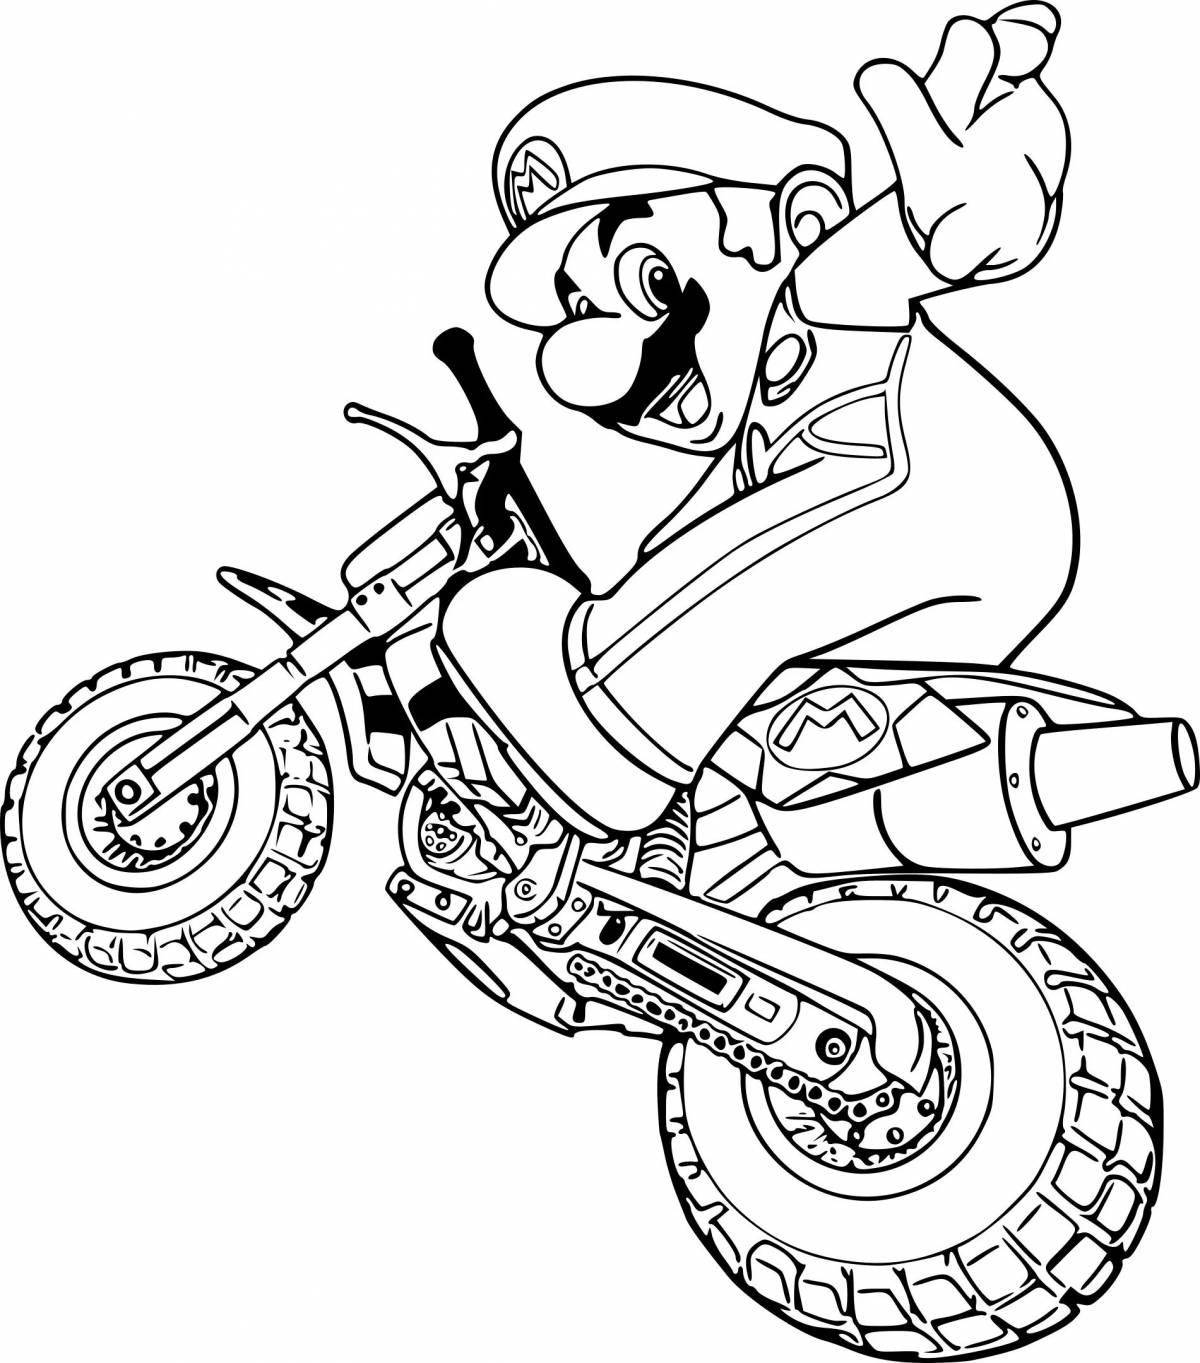 Coloring page bright motorcyclist